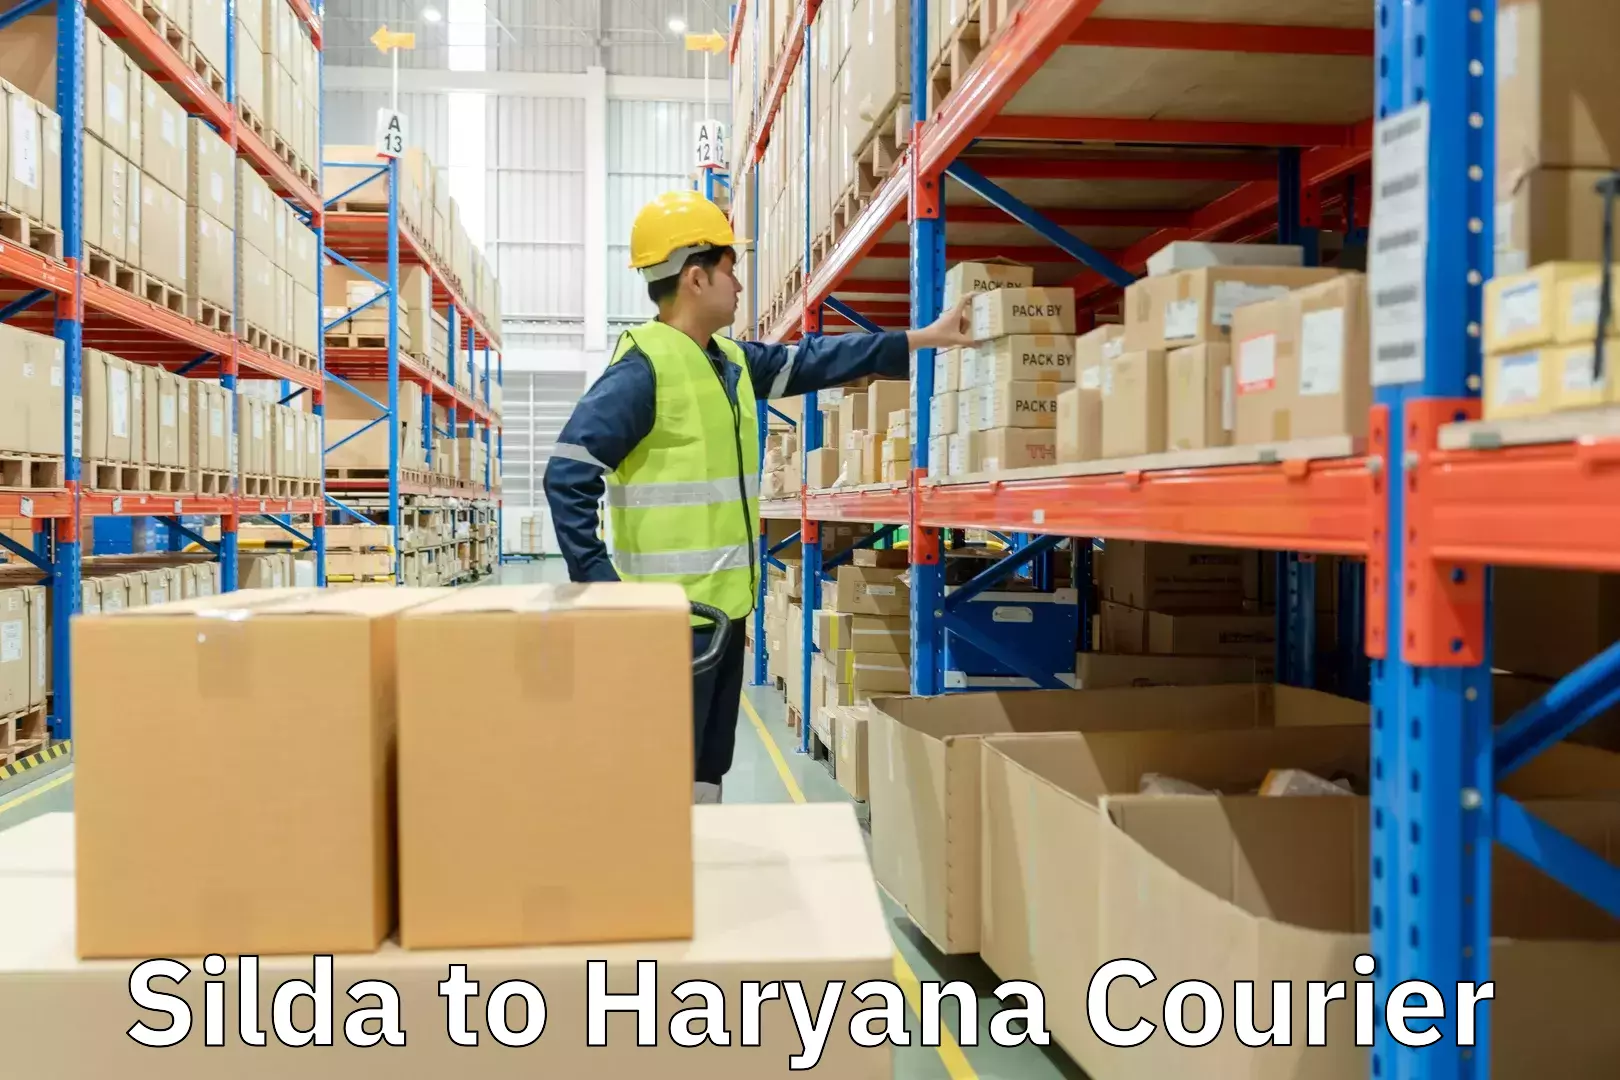 Residential courier service Silda to Haryana